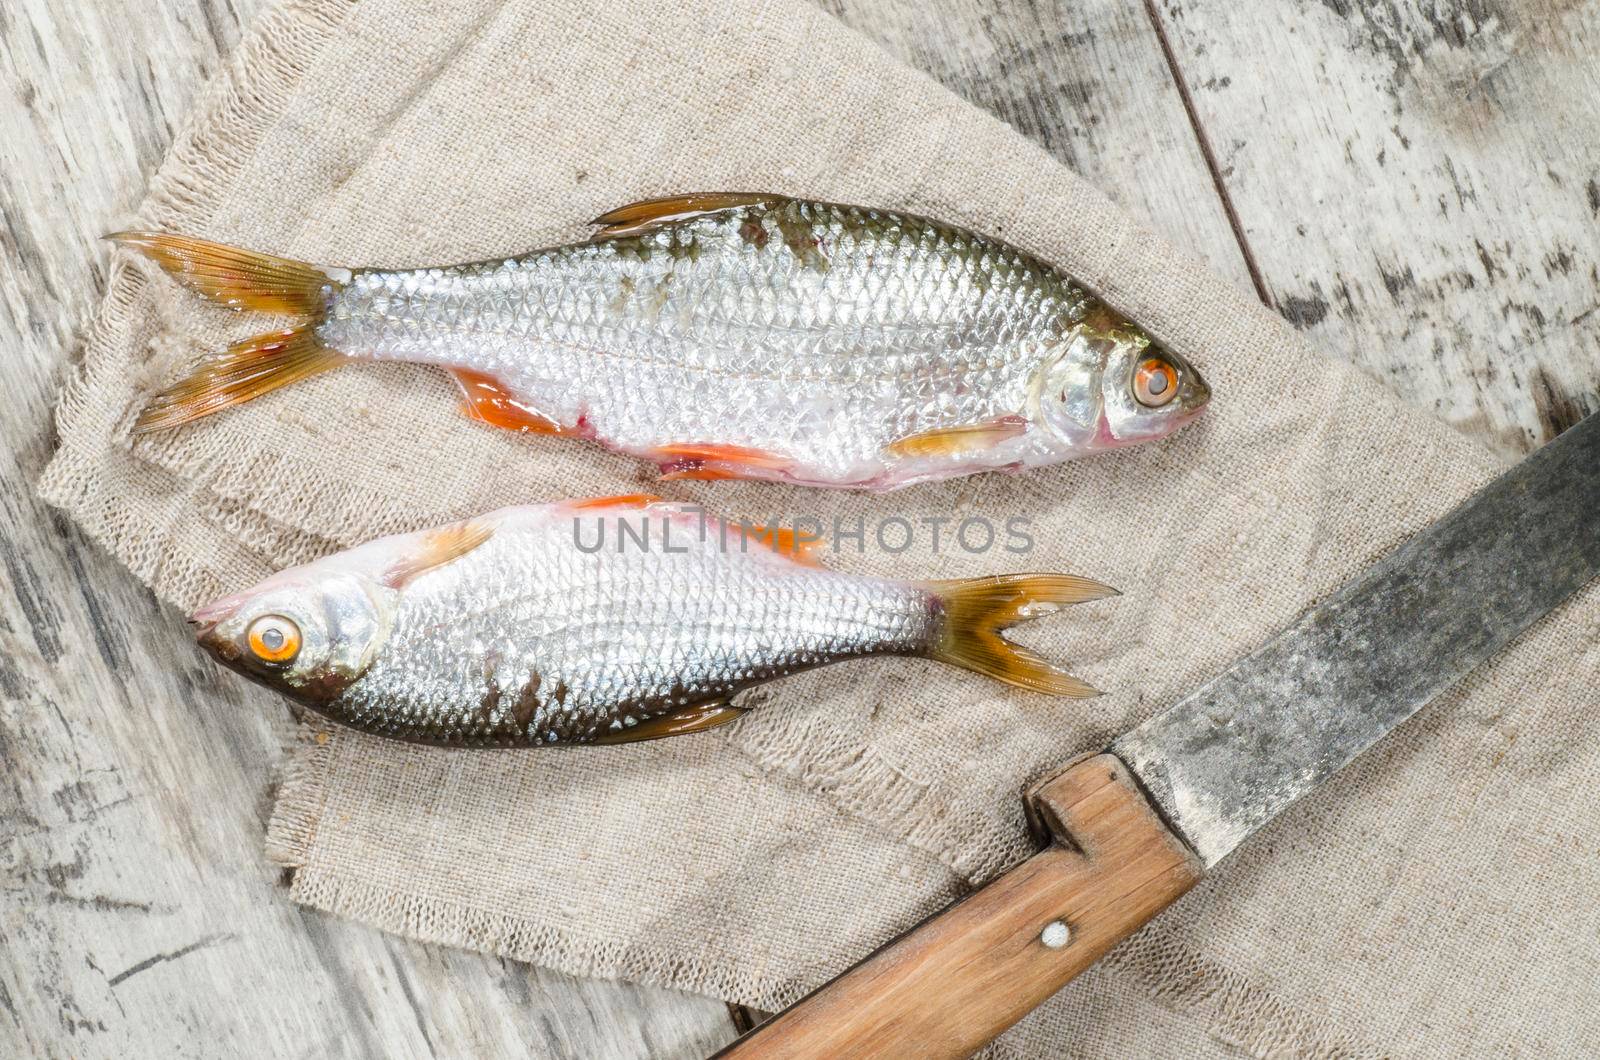 Two roaches fish on a linen napkin, near the old cutlery. From the series "Still Life with fresh fish"